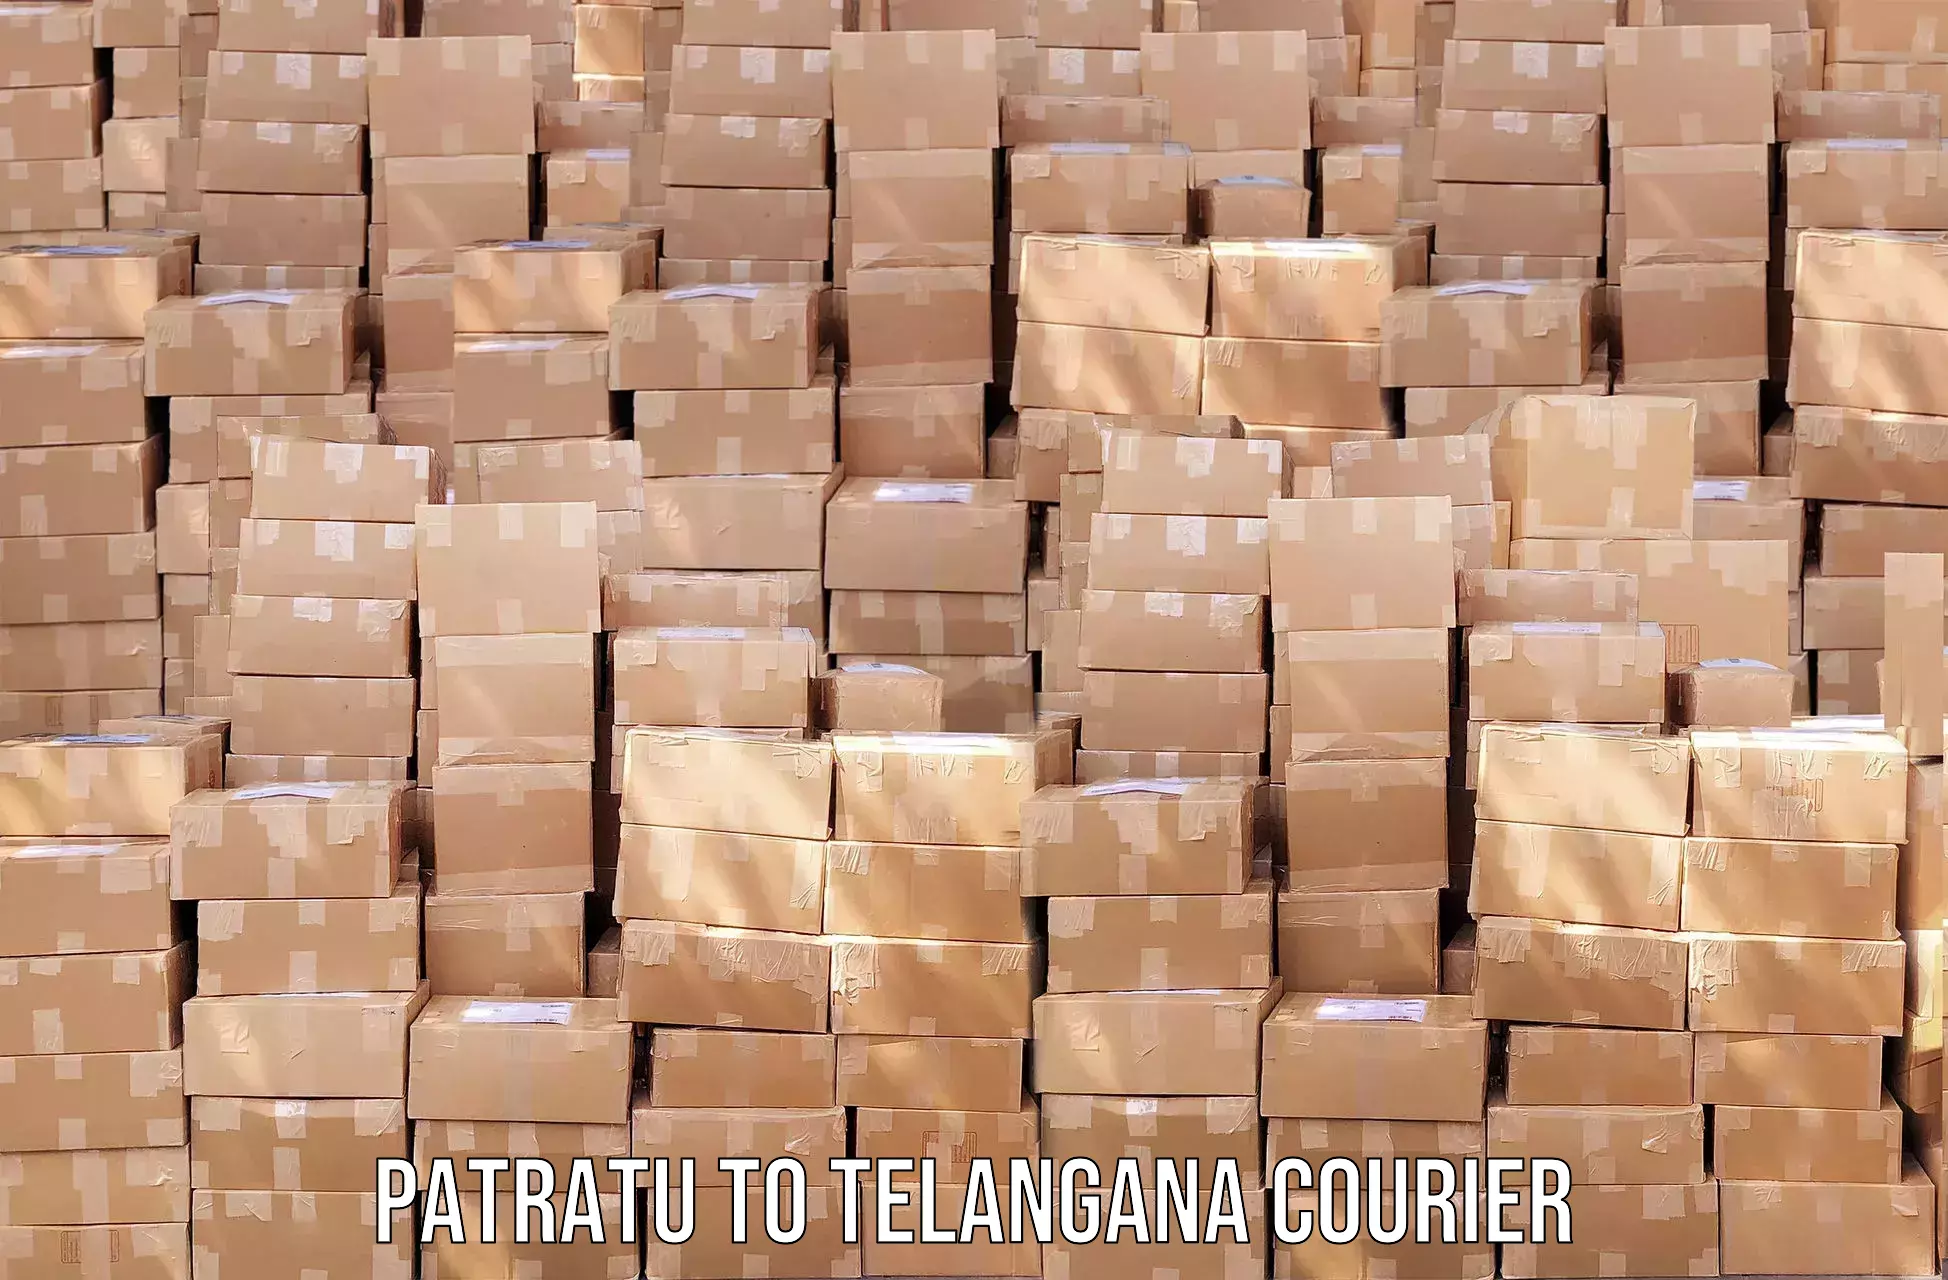 Cash on delivery service Patratu to Telangana